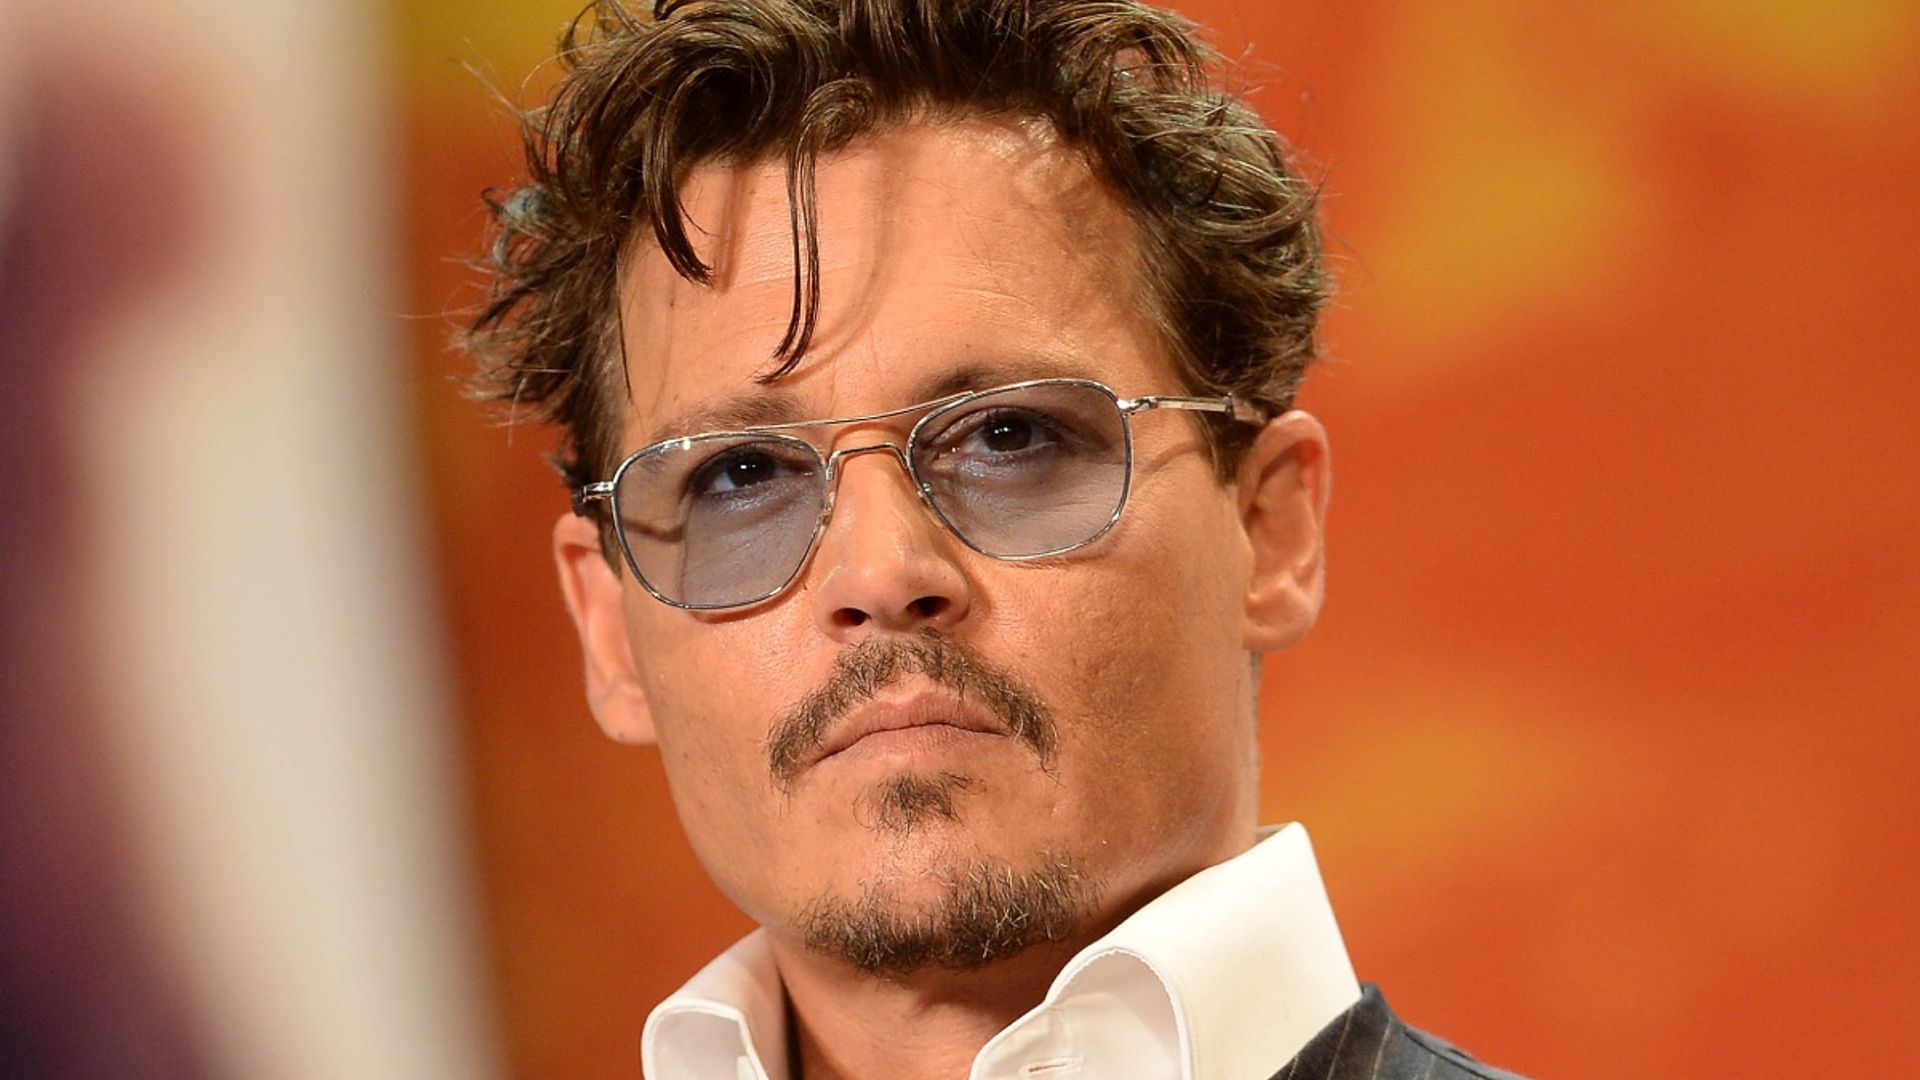 Get the Johnny Depp Look: How to Choose Glasses That Reflect His